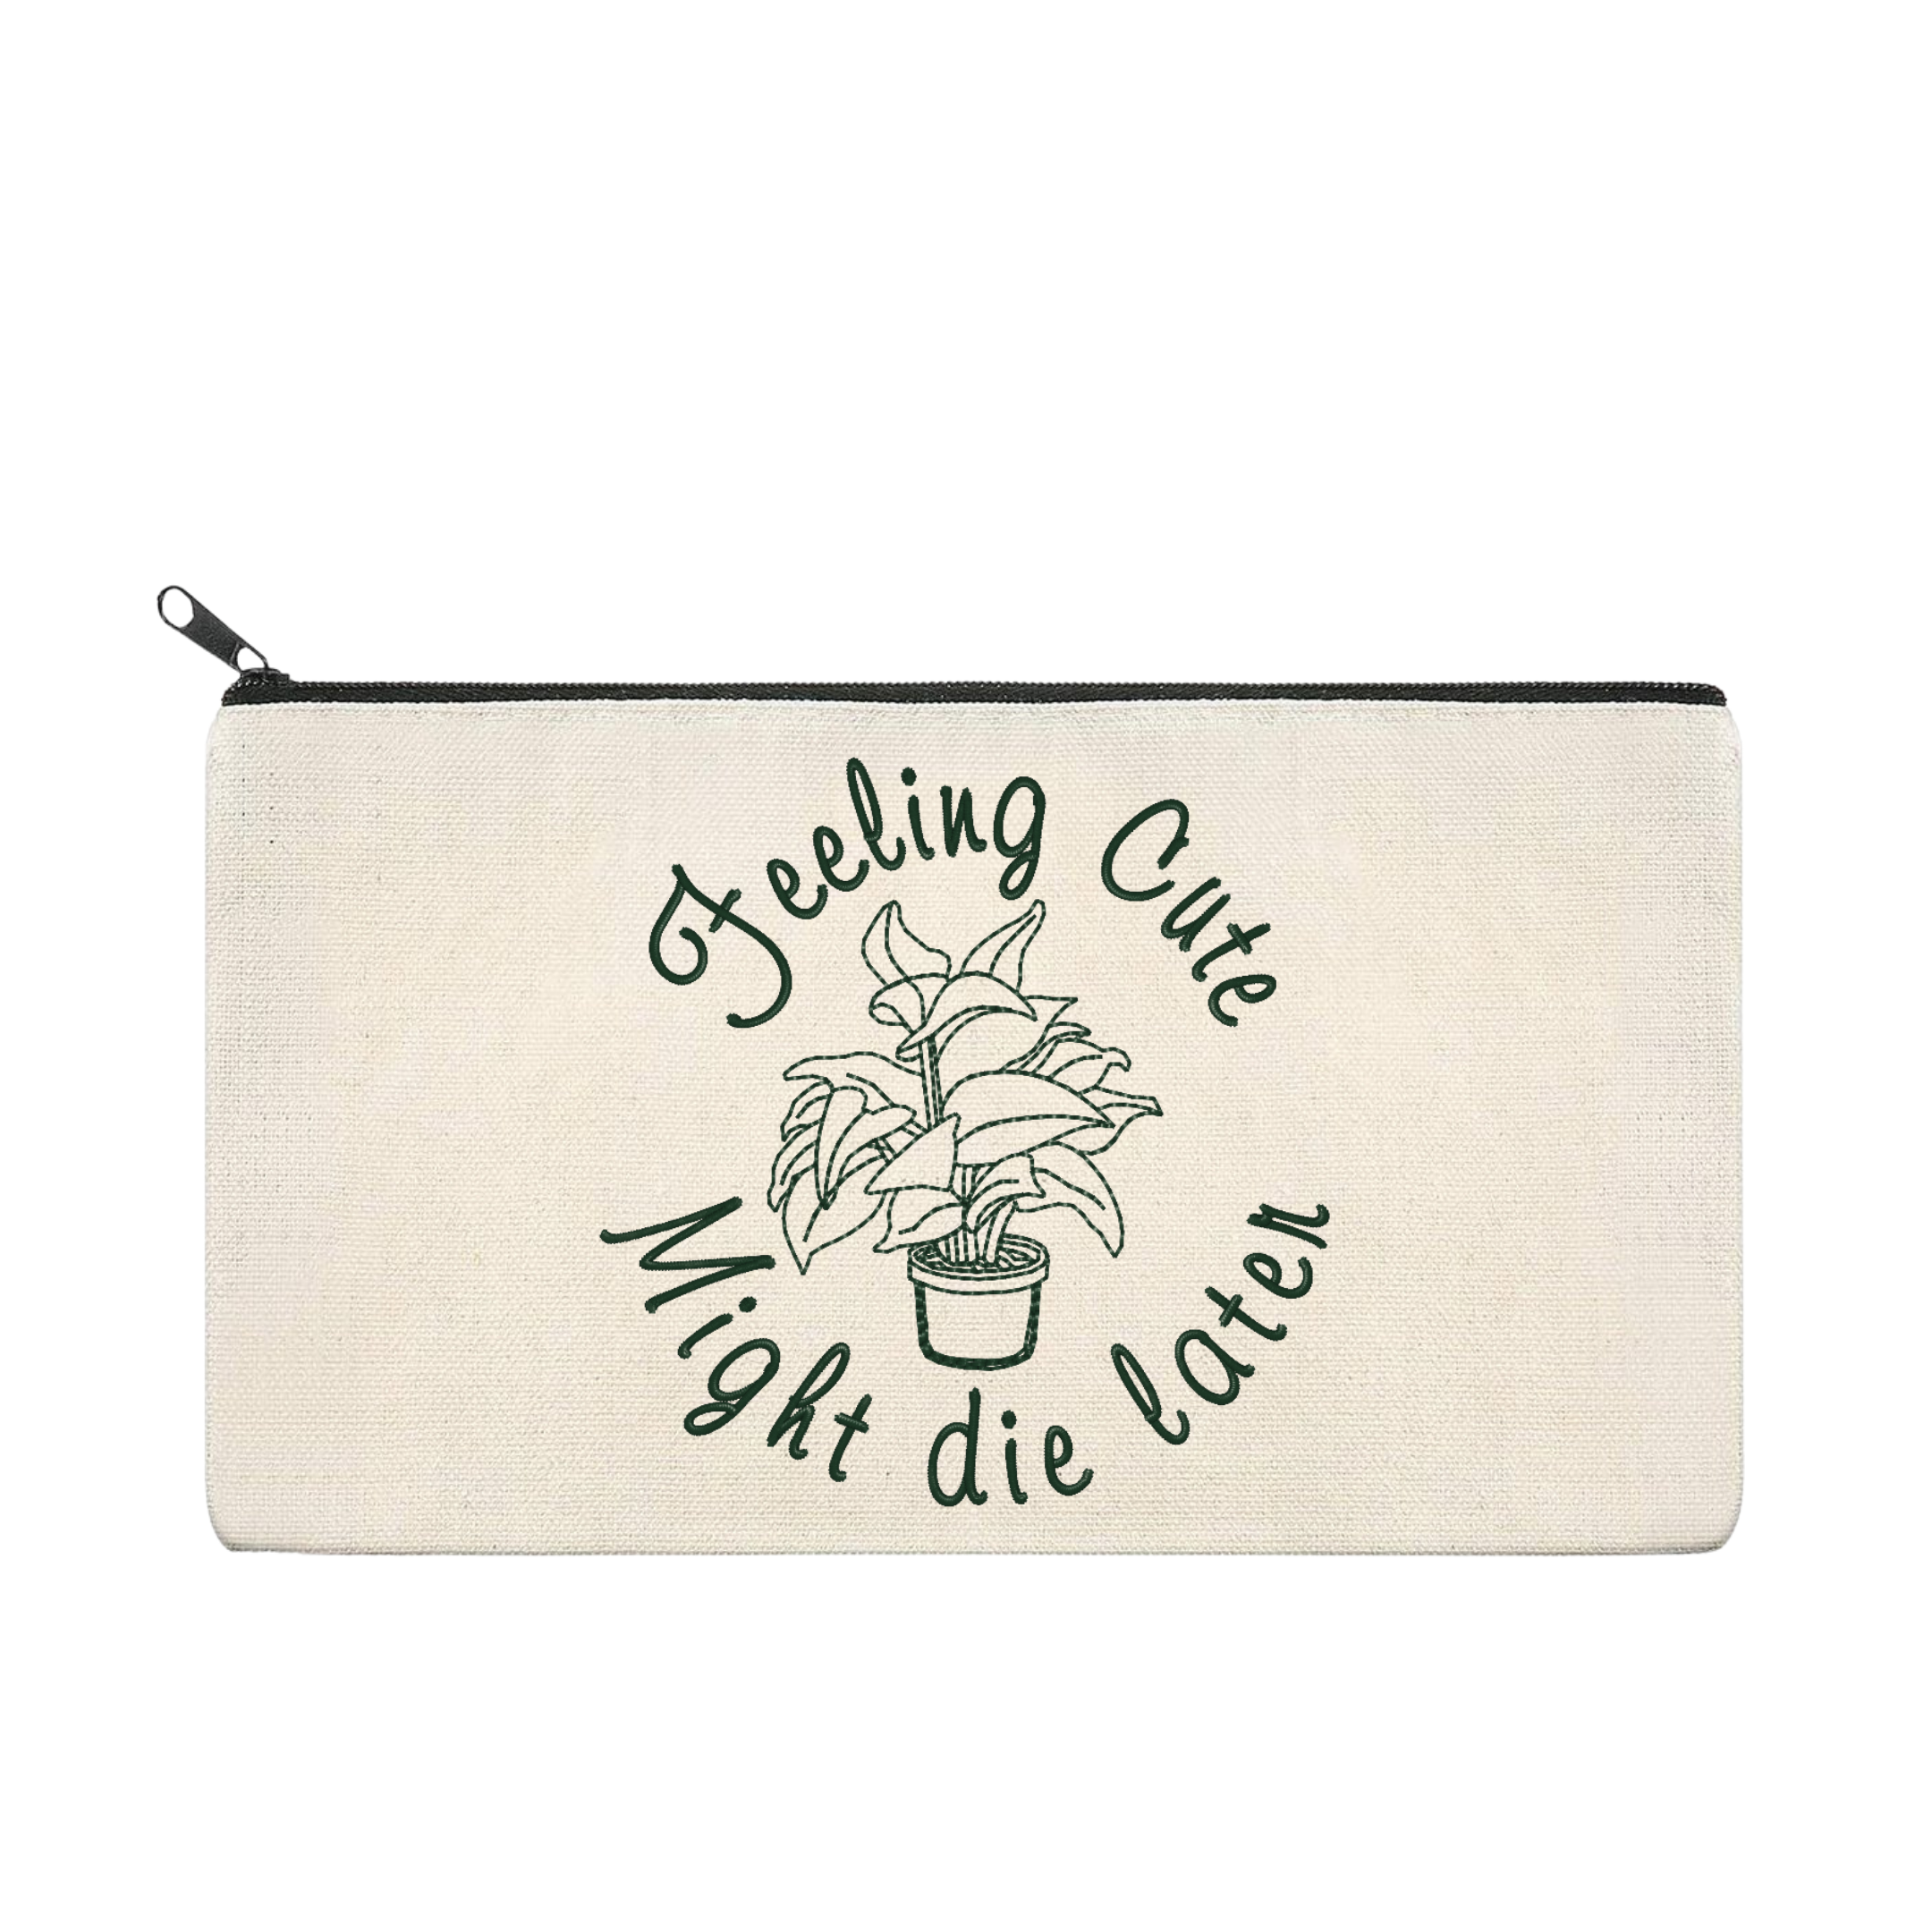 Feeling Cute Might Die Later Embroidered Plant Multipurpose Zipper Pouch Bag